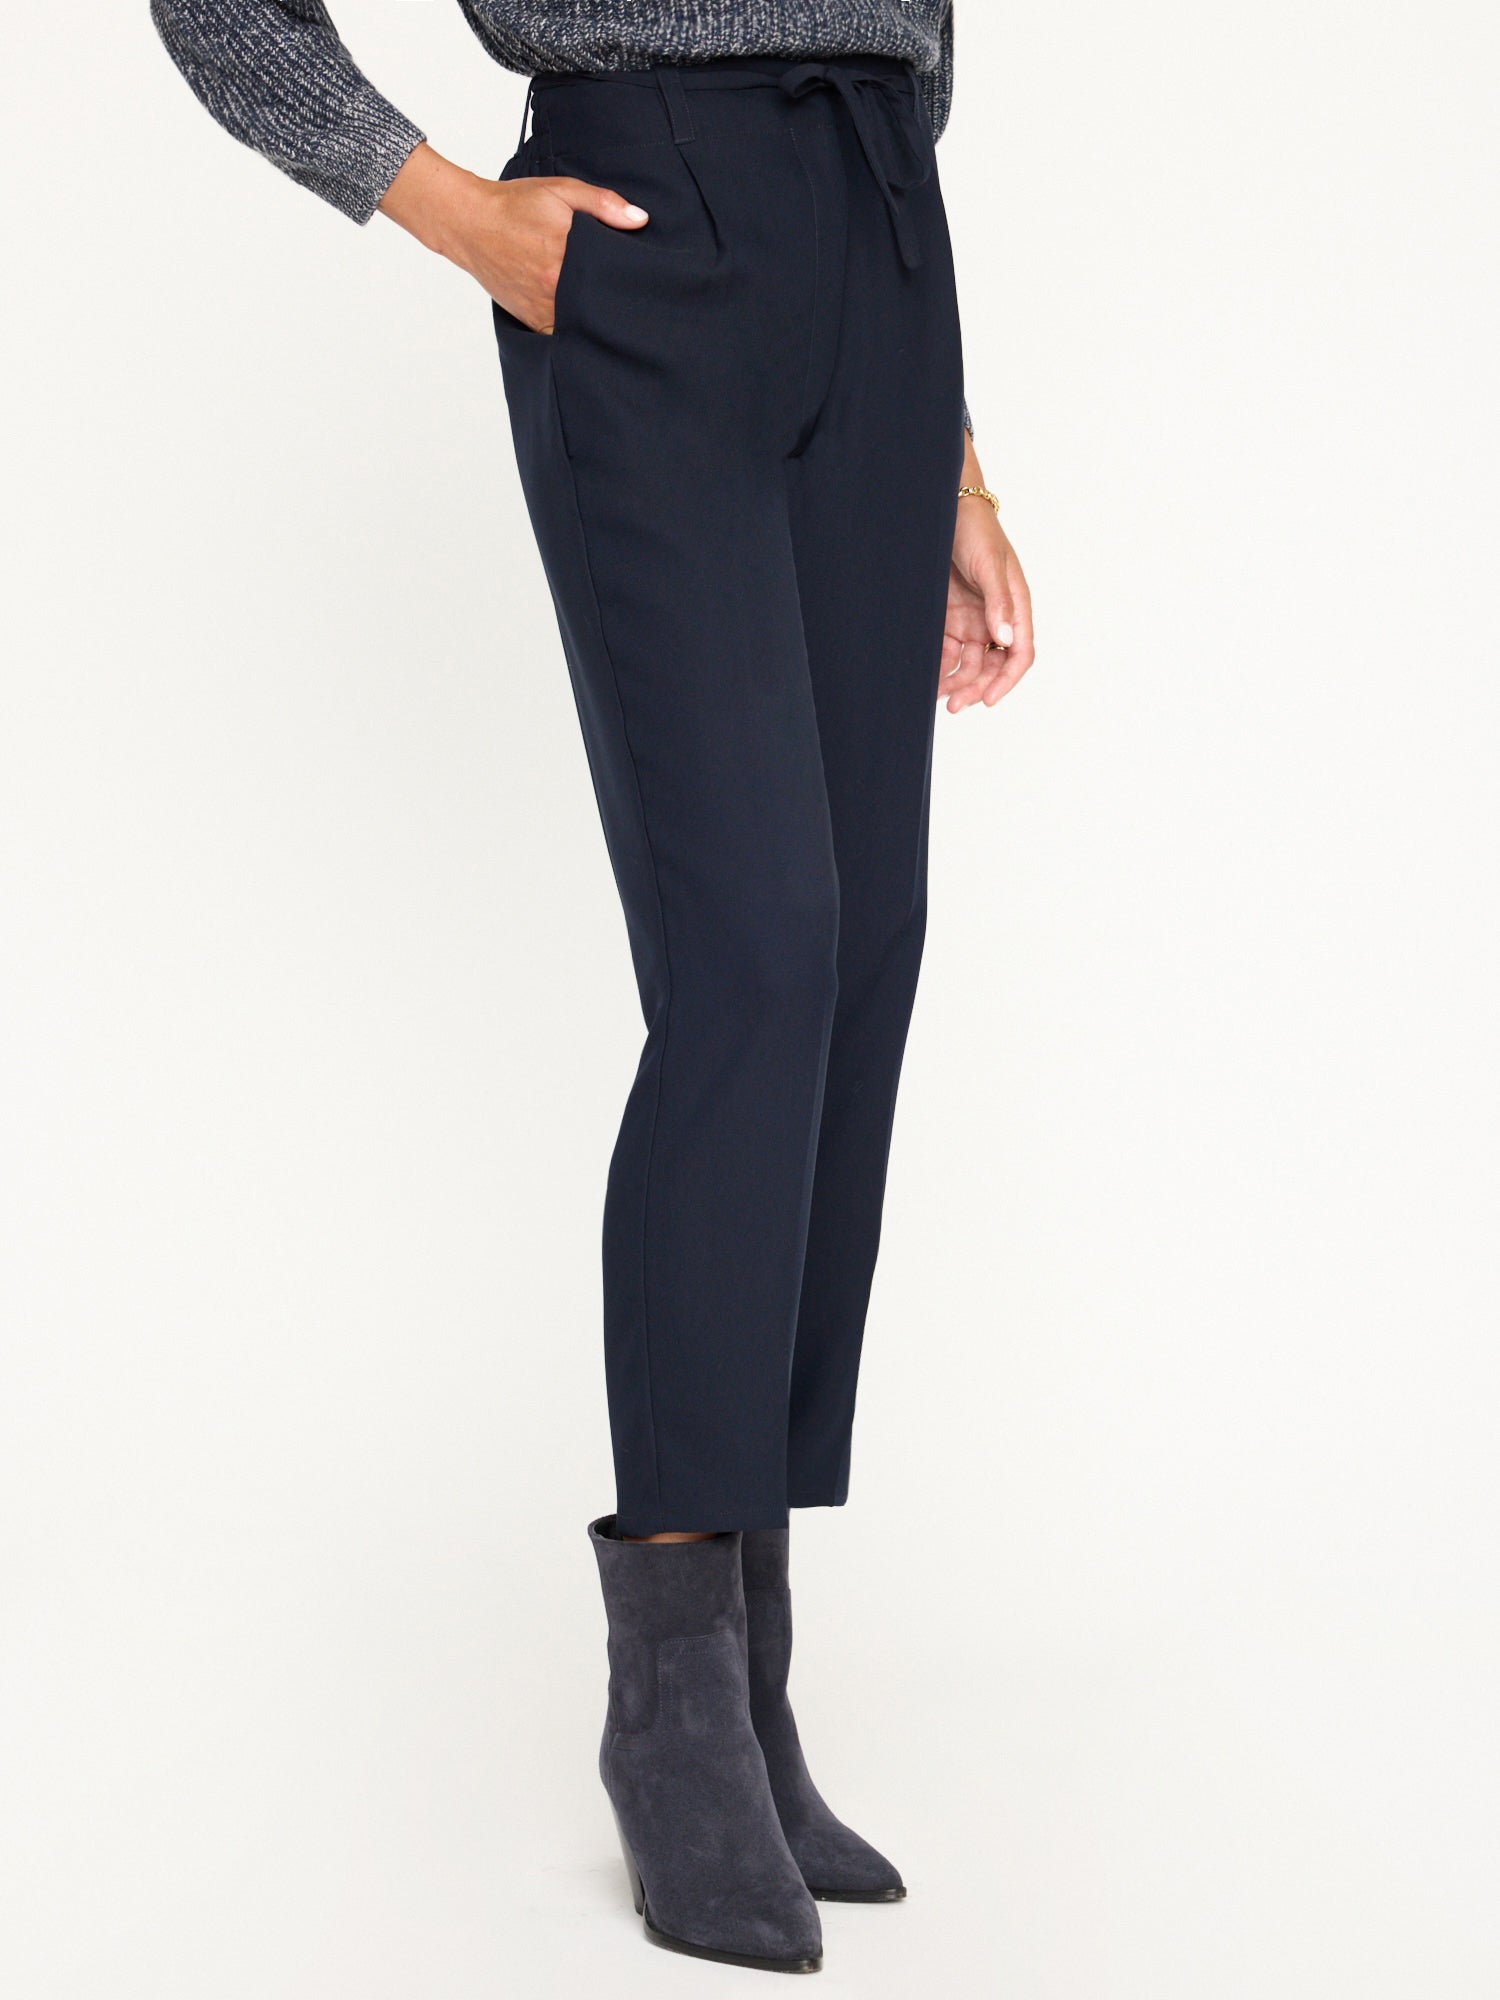 Dion navy front pleat ankle length pant side view 2